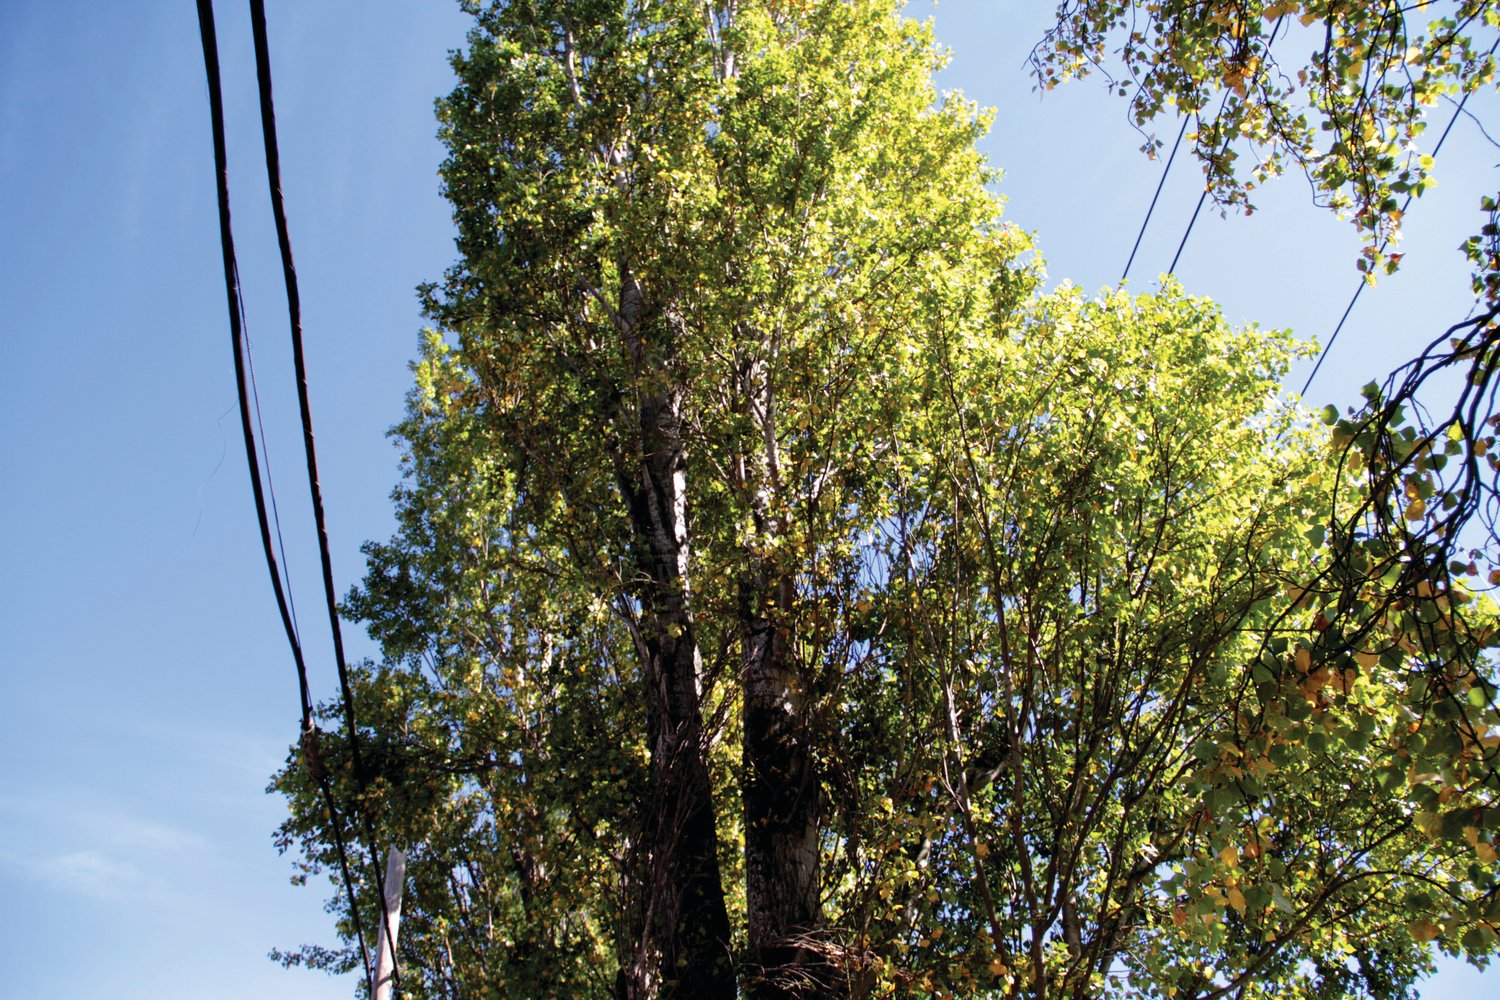 Local officials warn that the poplar trees along Sims Way are a safety hazard, because they are growing into power lines.